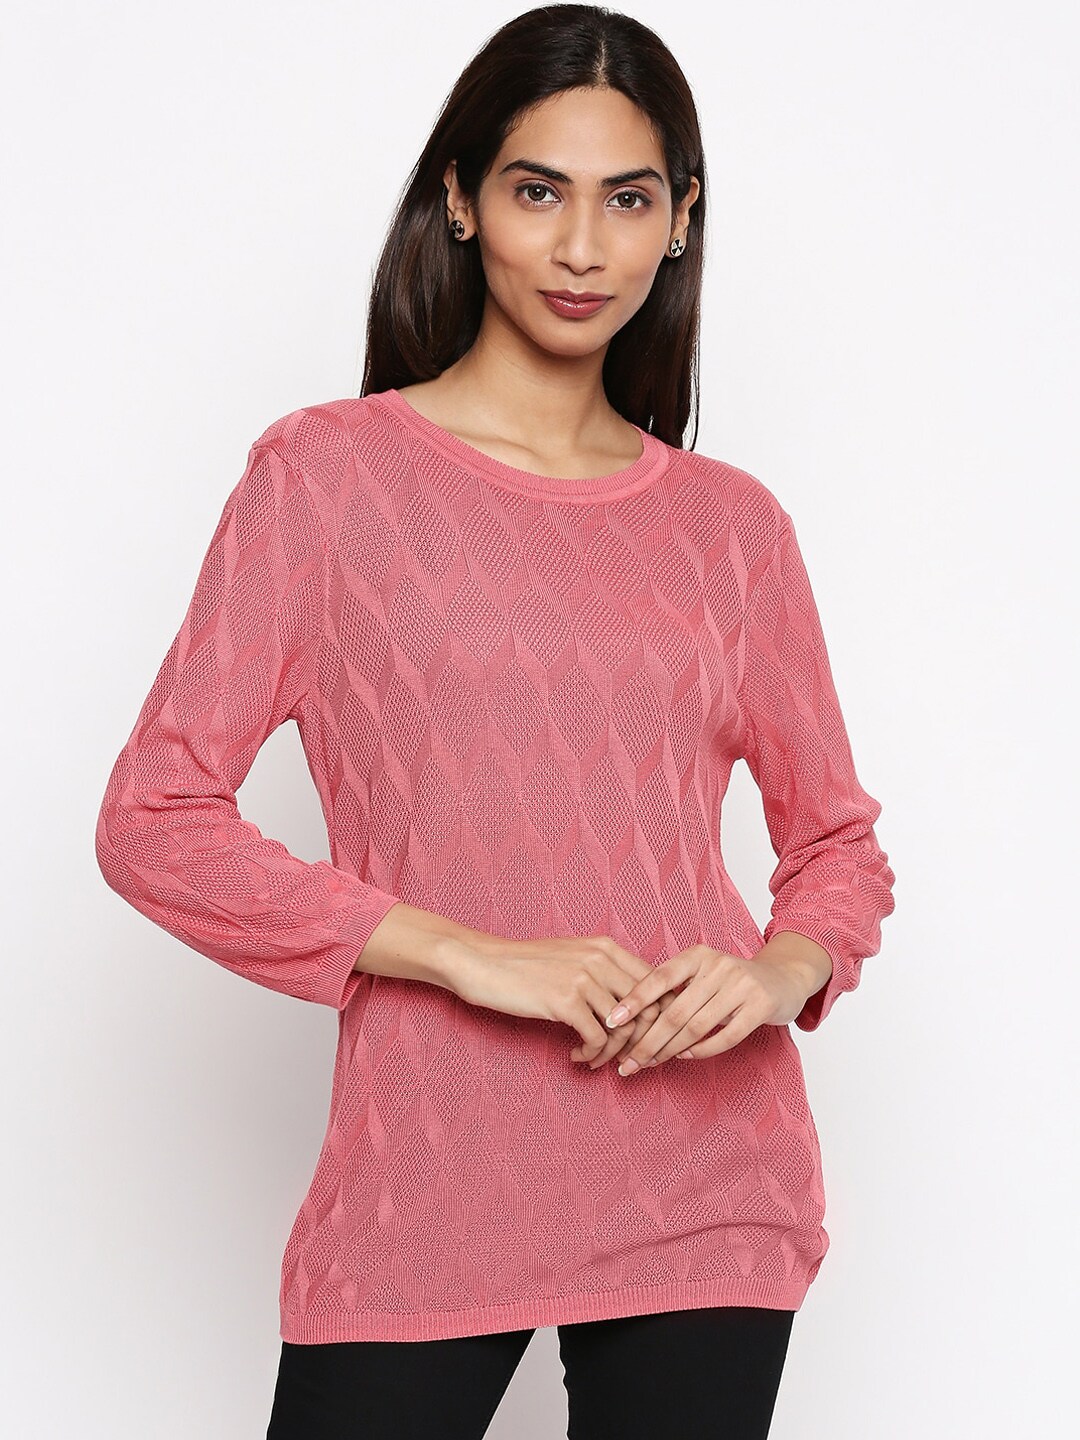 Annabelle by Pantaloons Women Pink Self Design Pullover Sweater Price in India